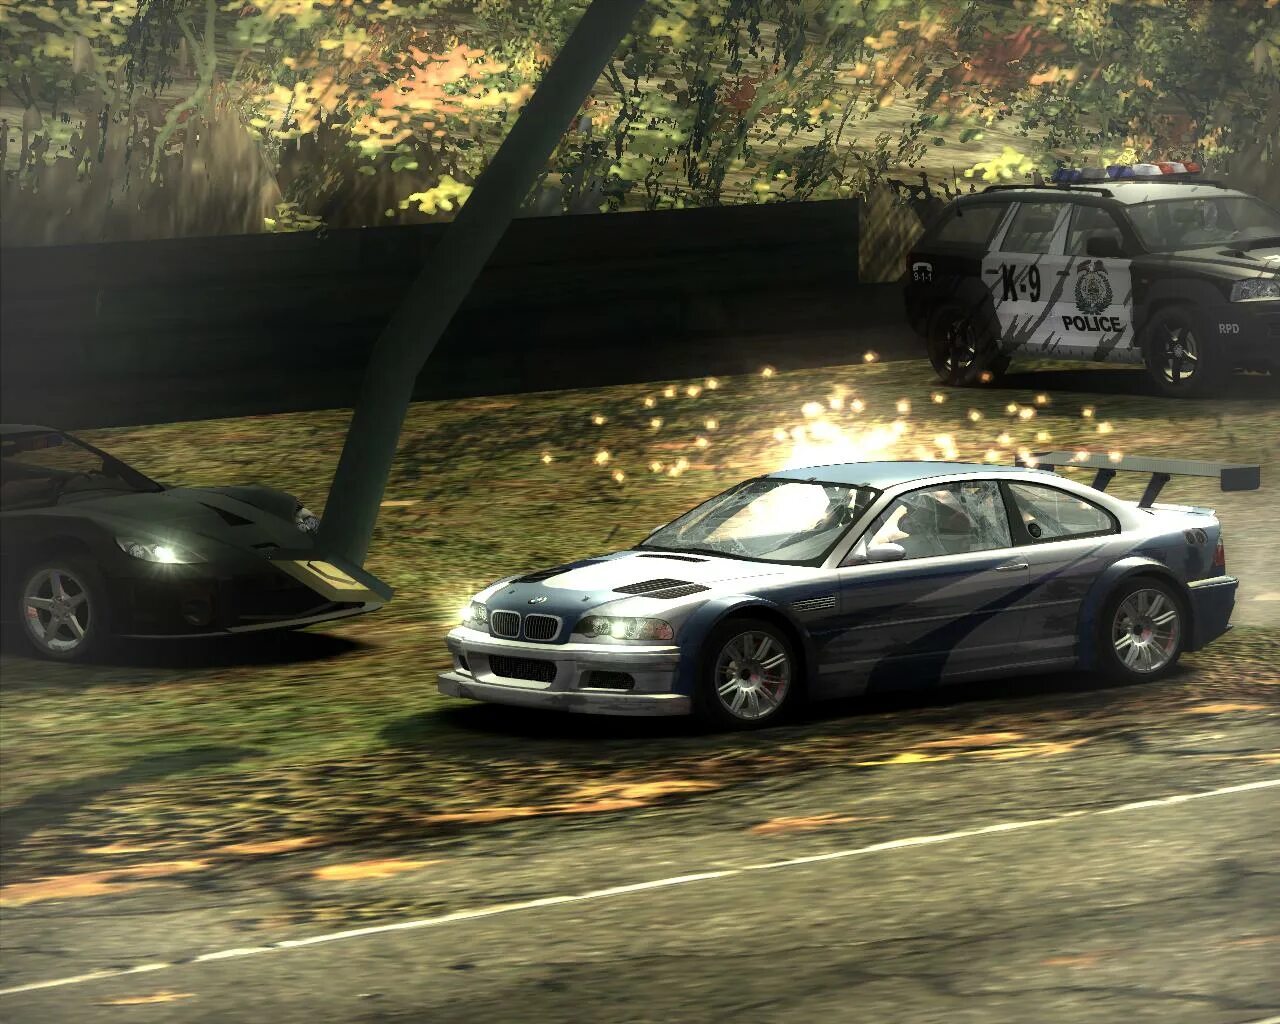 Nfs mw 2005 моды. Нид фор СПИД мост вантед Xbox 360. Need for Speed most wanted 2005. NFS MW 2005. NFS most wanted 2005 вертолет.